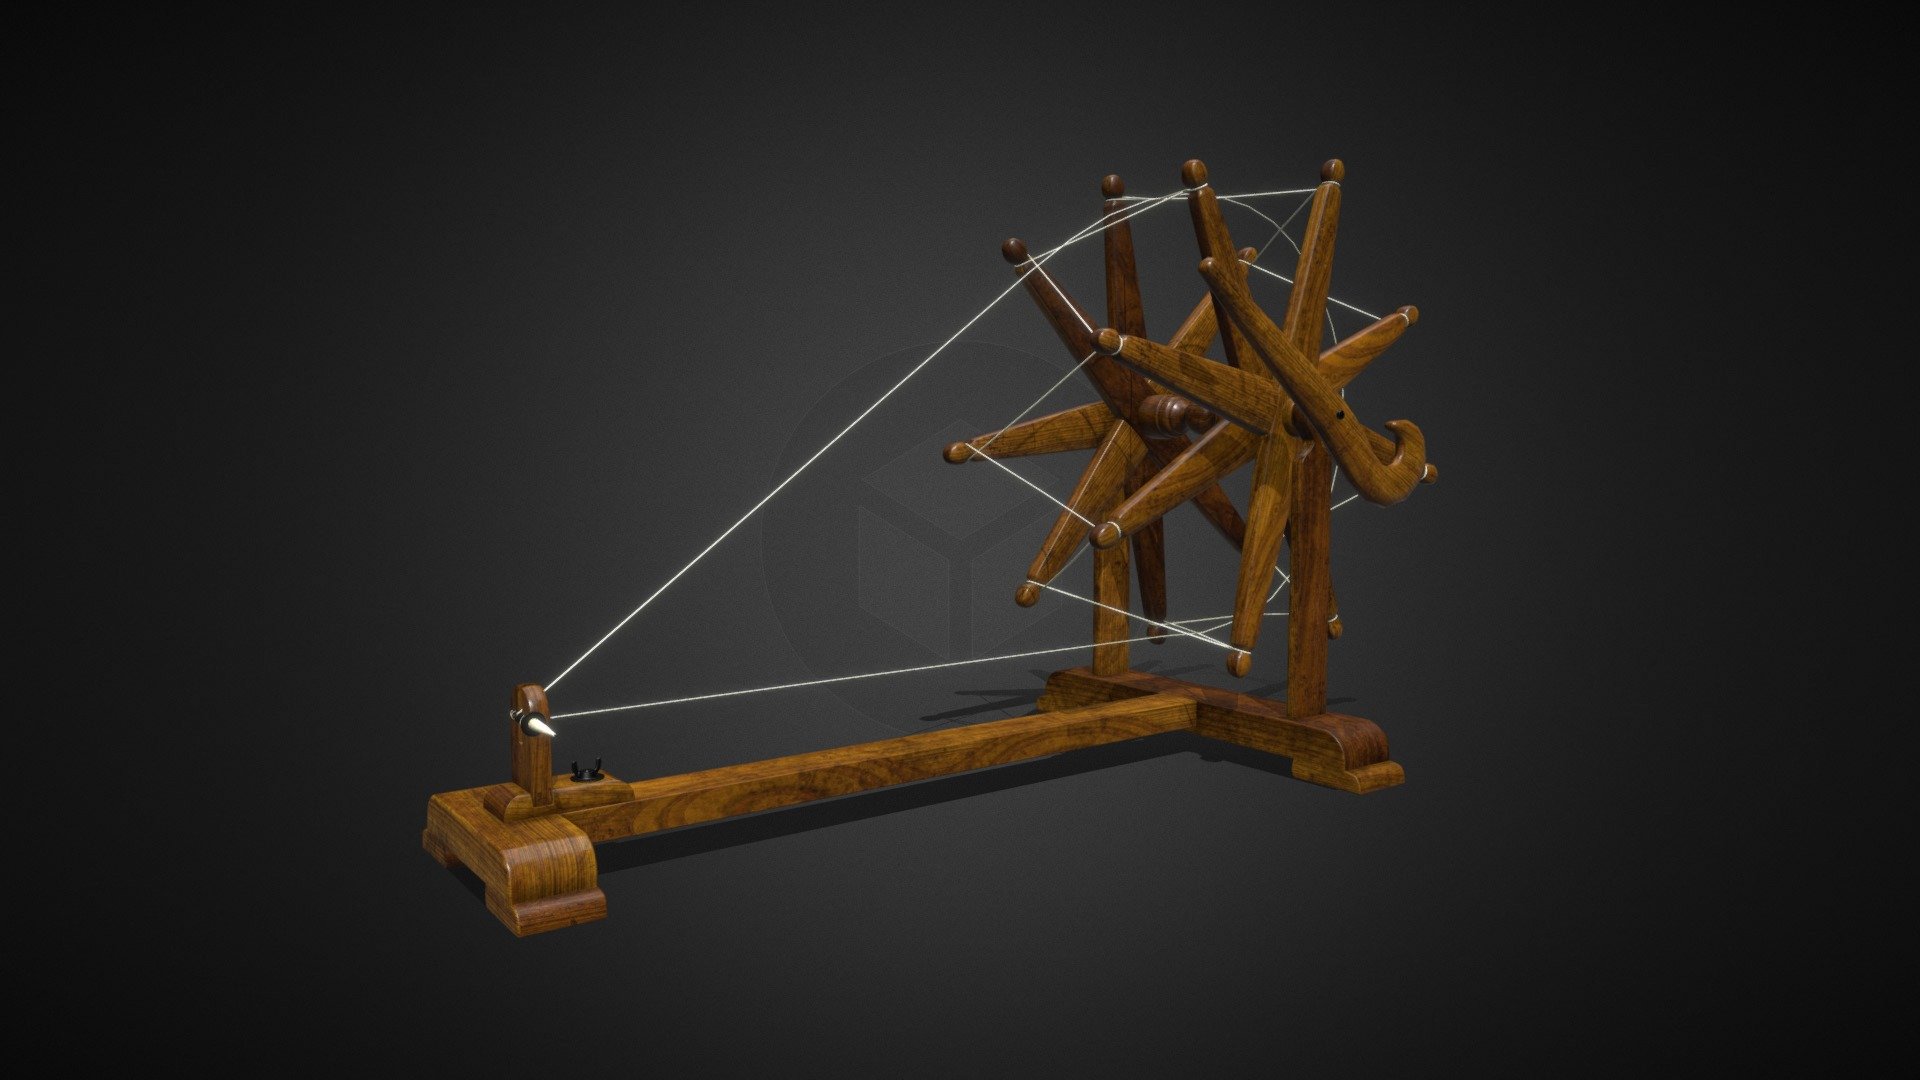 A spinning wheel is a device for spinning thread or yarn from natural or synthetic fibres. Spinning wheels were first used in India. 
The word charkha, defines a wheel, is related to the word &ldquo;circle